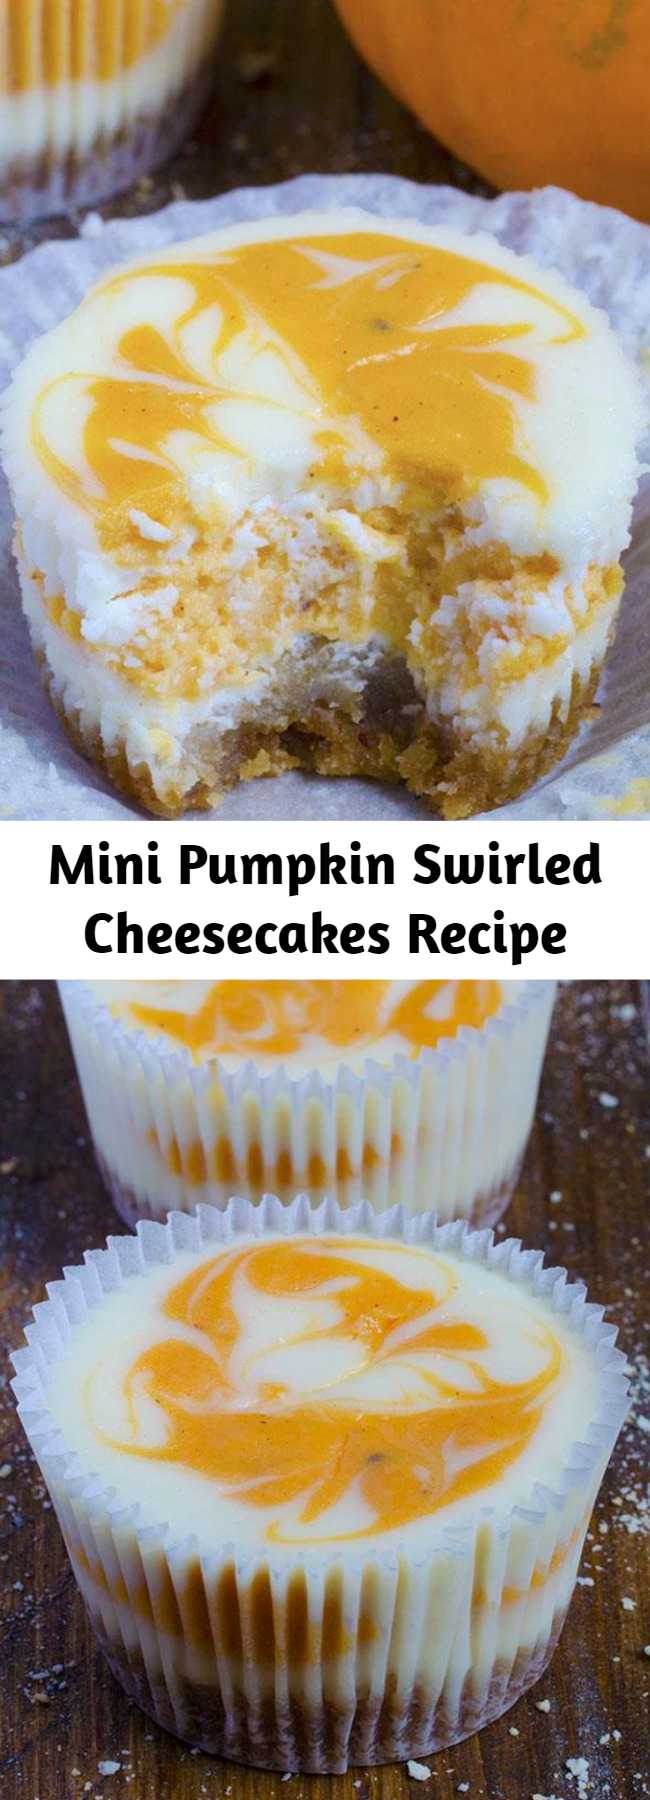 Mini Pumpkin Swirled Cheesecakes Recipe - I always adore sweet cheesecake bites but with pumpkin I got more than I expect! These gorgeous Mini Pumpkin Swirled Cheesecakes are the best homemade treat to satisfy your fall flavor cravings. Perfectly swirled and spiced for a delicious pumpkin dessert!